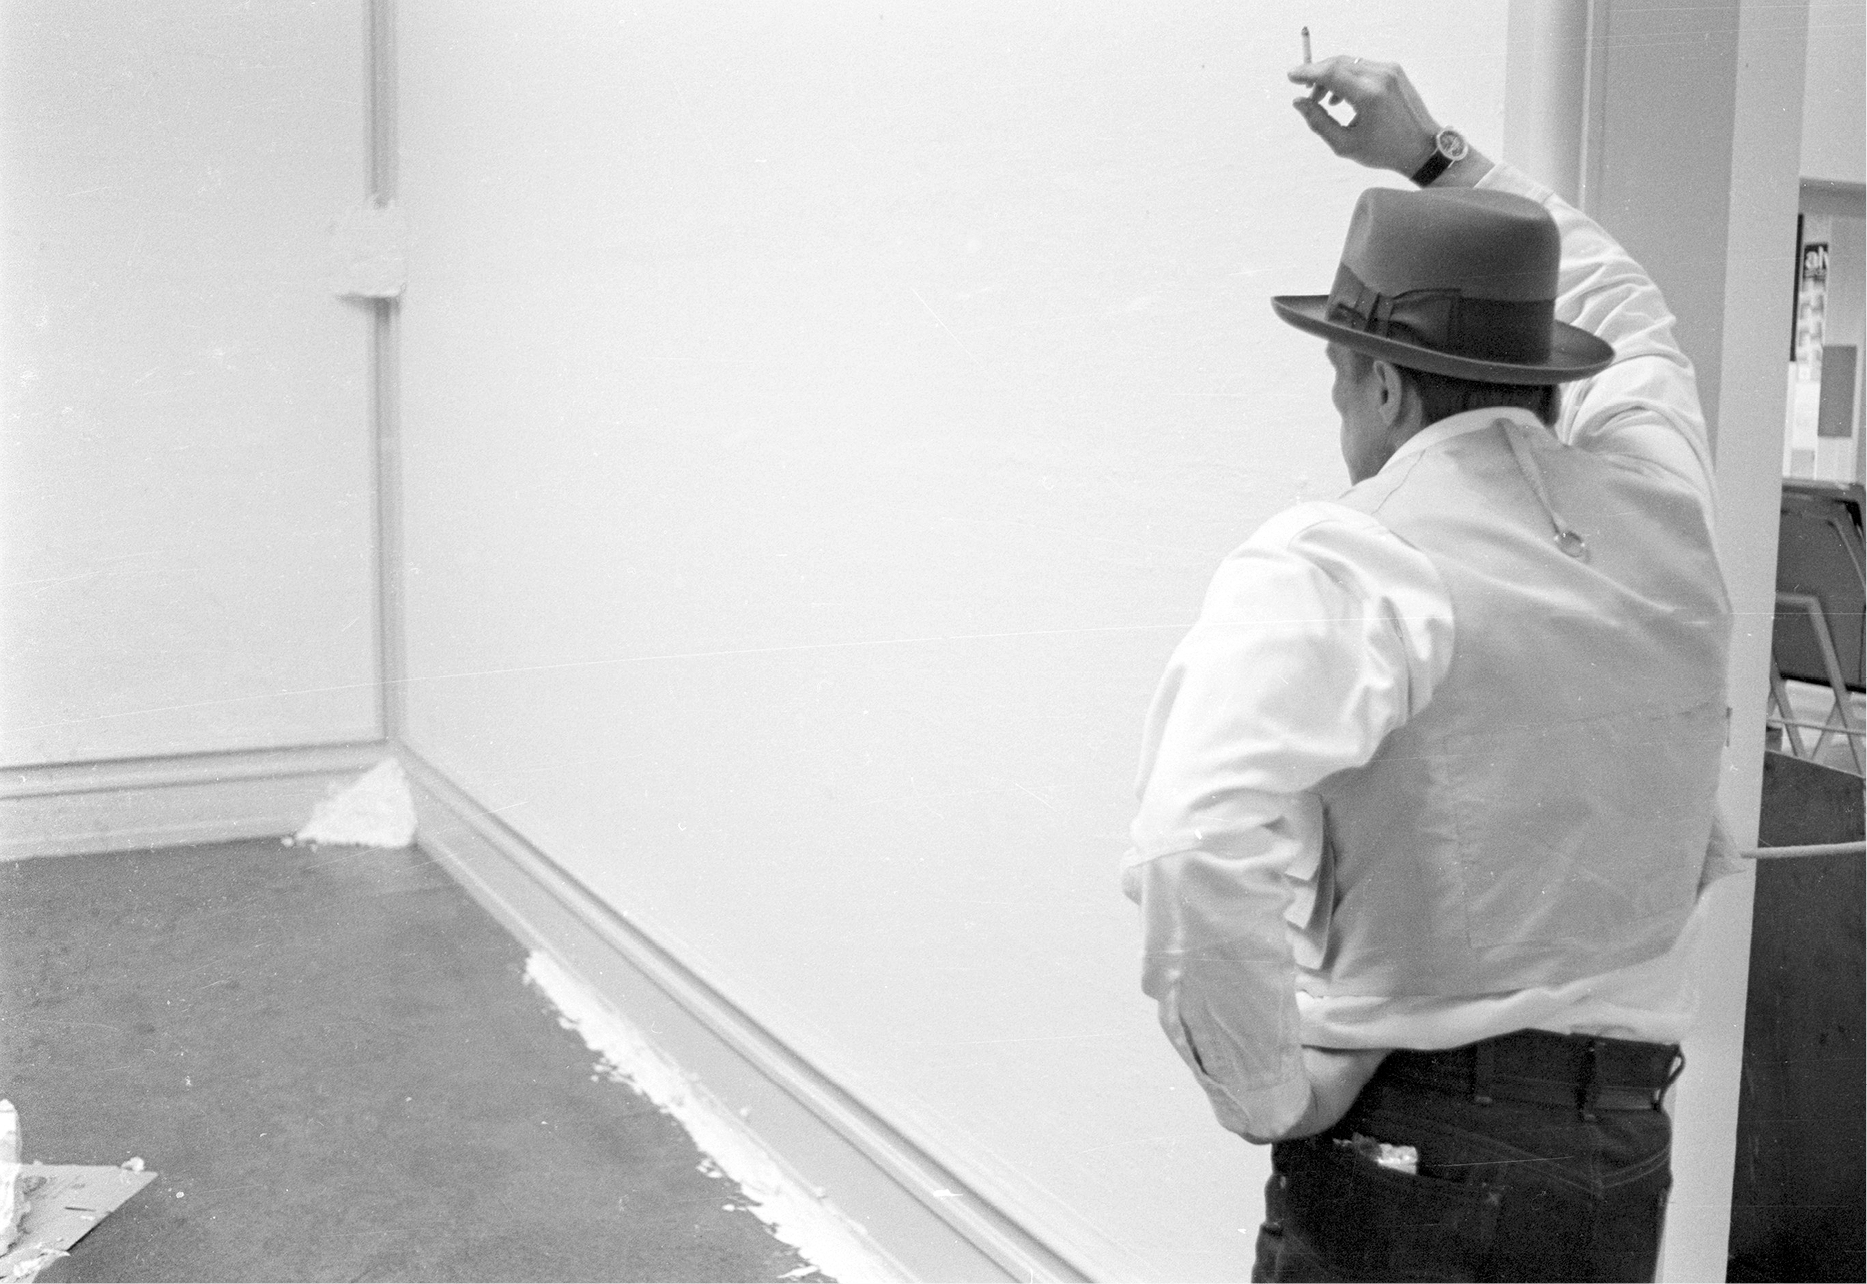 Joseph Beuys with Fettecke, 1969, from ‘When Attitudes Become Form’, Kunsthalle Bern, 1969, courtesy The Getty Research Institute, Los Angeles (2011.M.30) photograph: Balthasar Burkhard, courtesy J. Paul Getty Trust